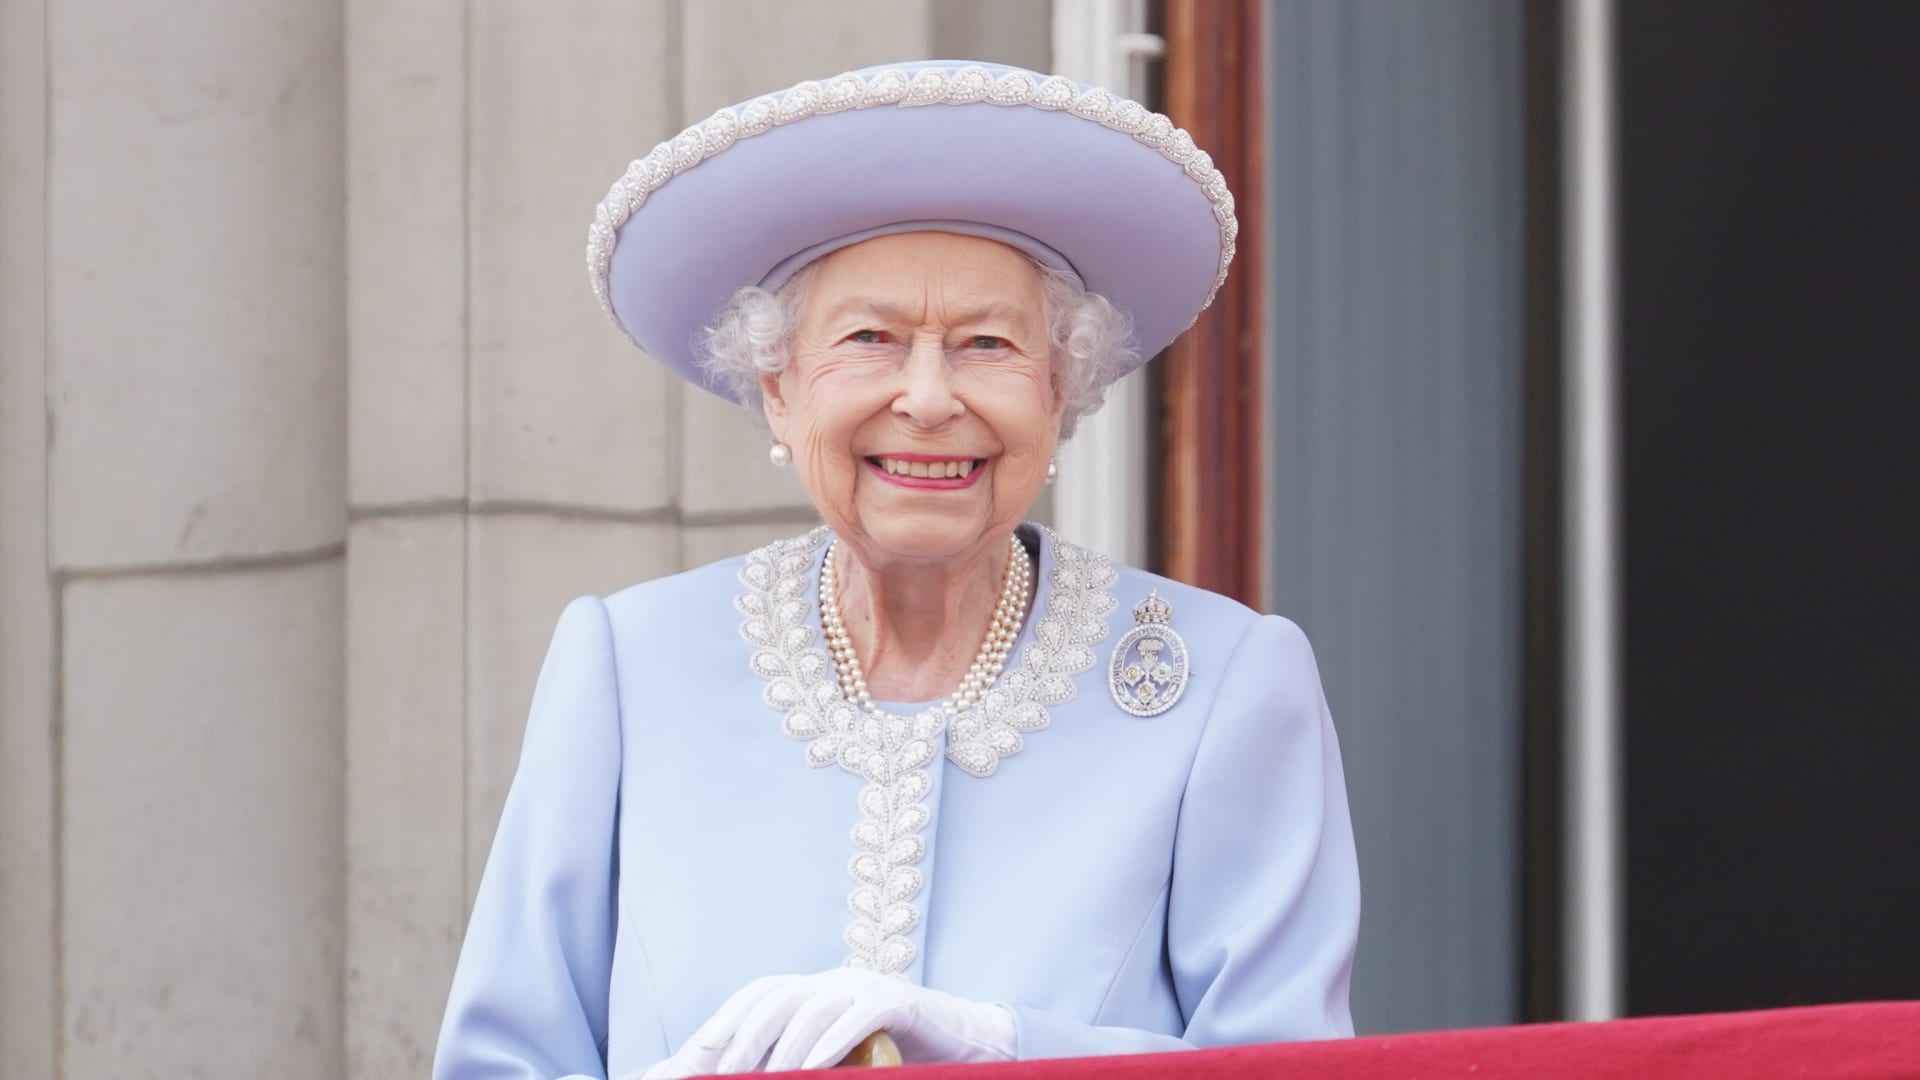 Queen Elizabeth II watches from the balcony of Buckingham Palace during the Trooping the Colour parade the Trooping the Colour parade on June 2, 2022 in London, England.